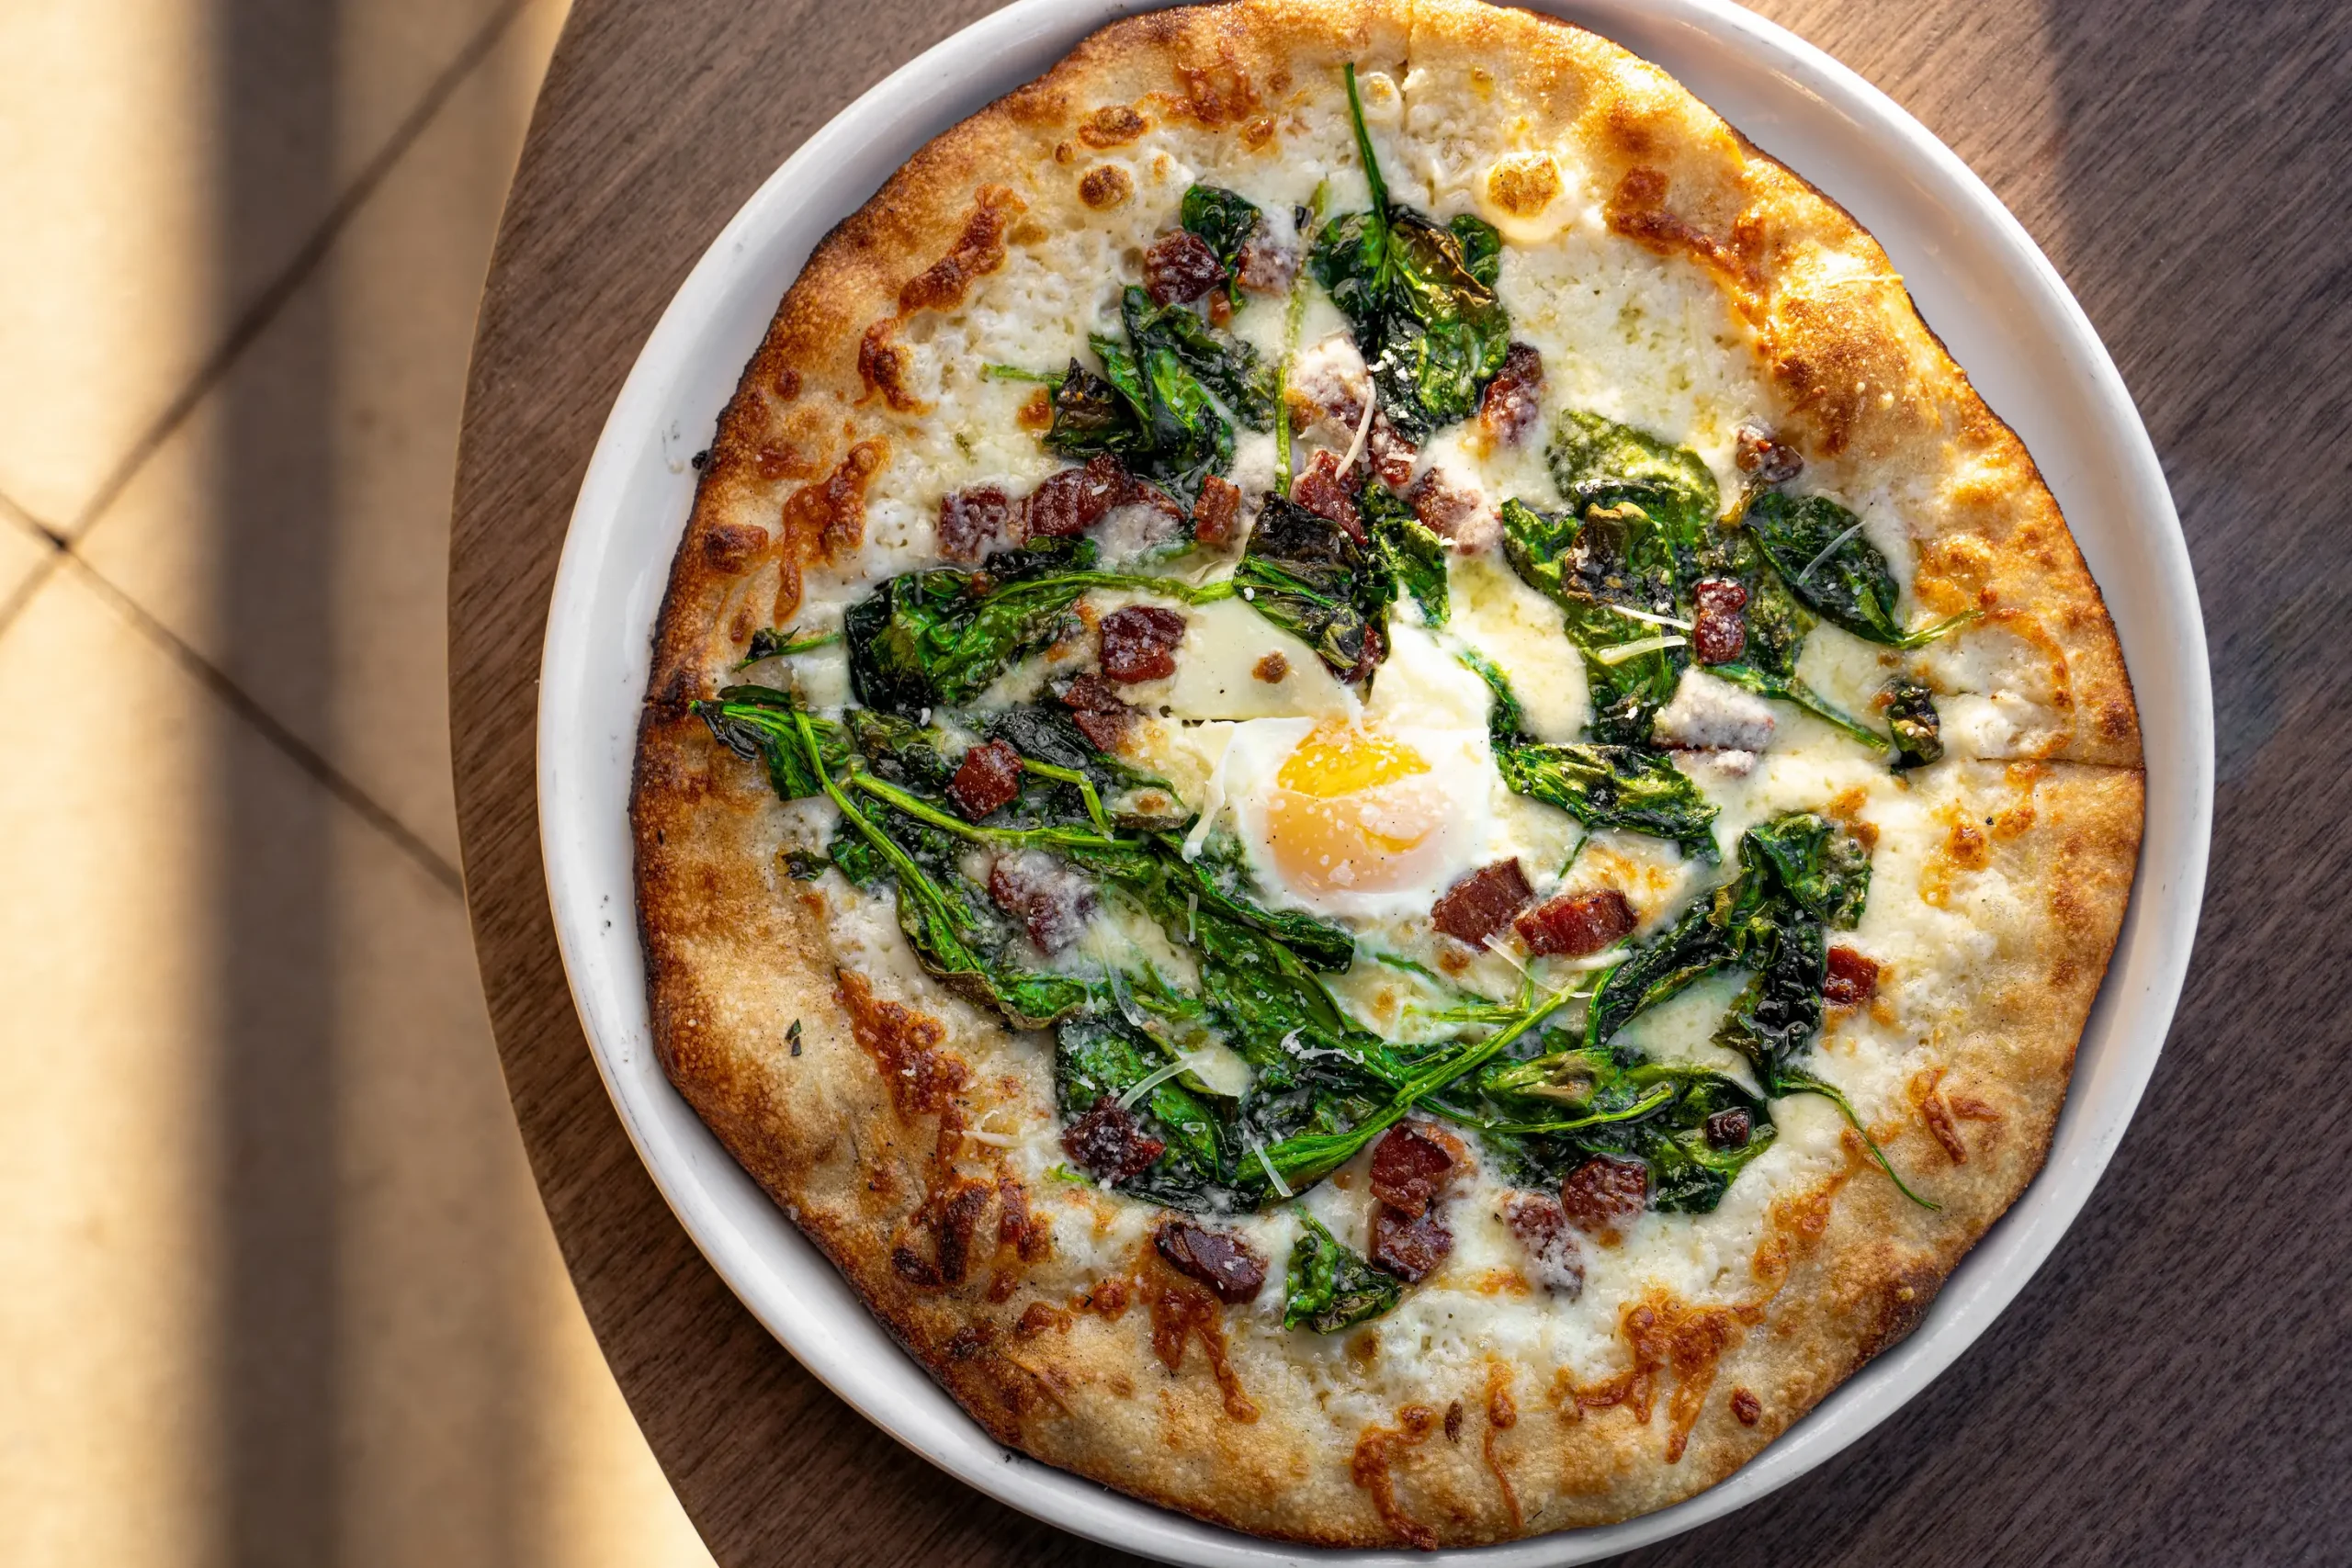 Carbonaro pizza with bacon, white sauce and runny egg